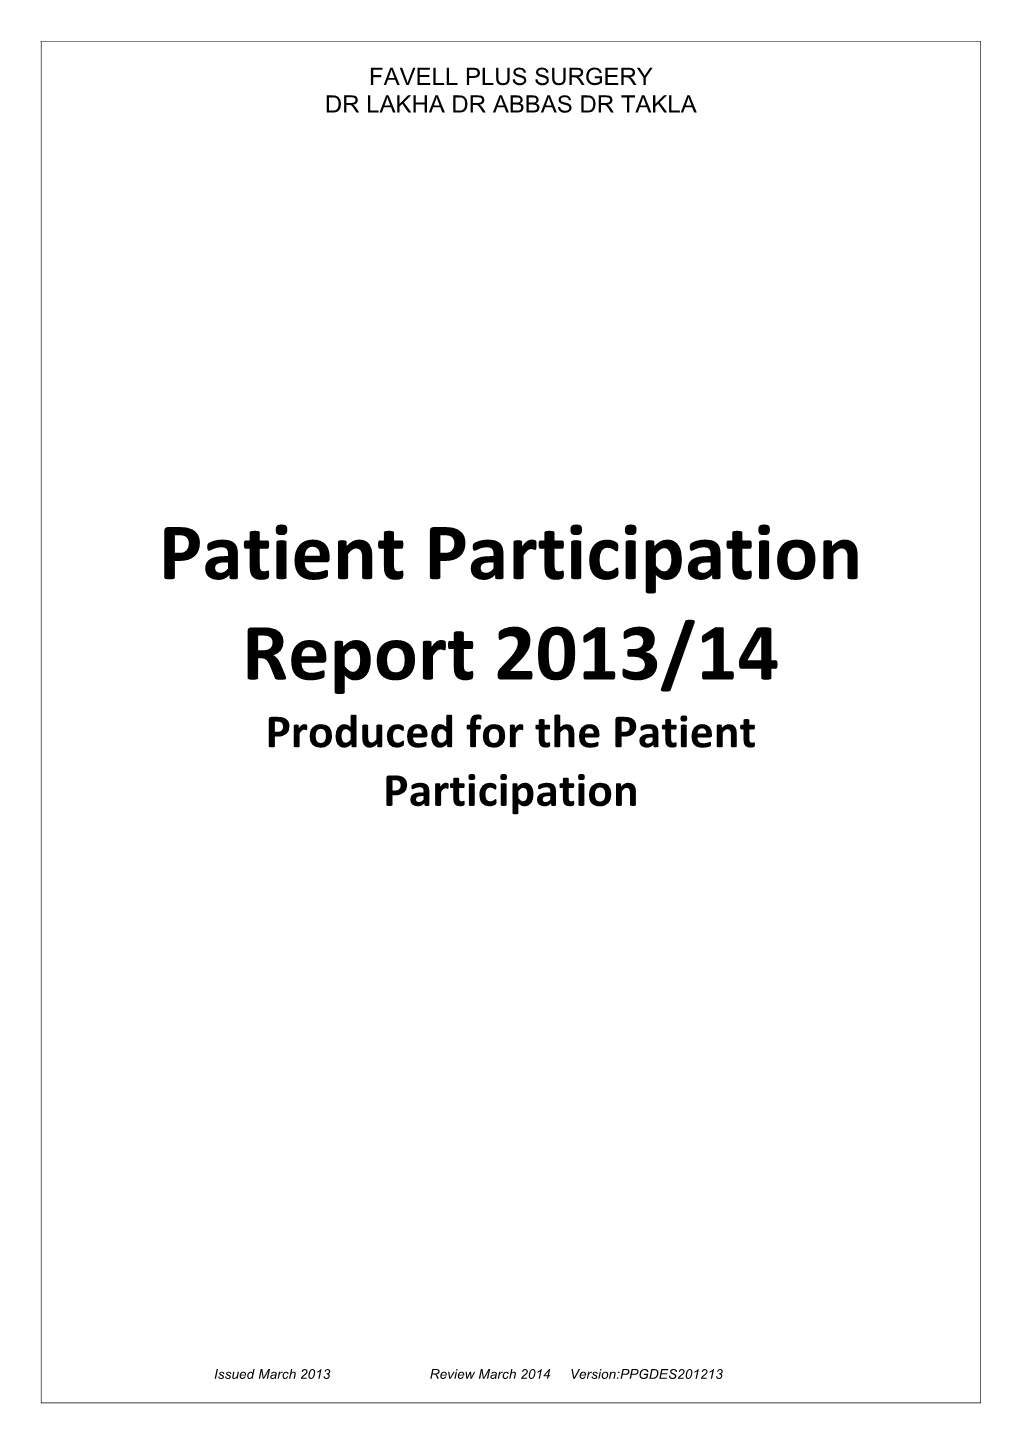 Produced for the Patient Participation